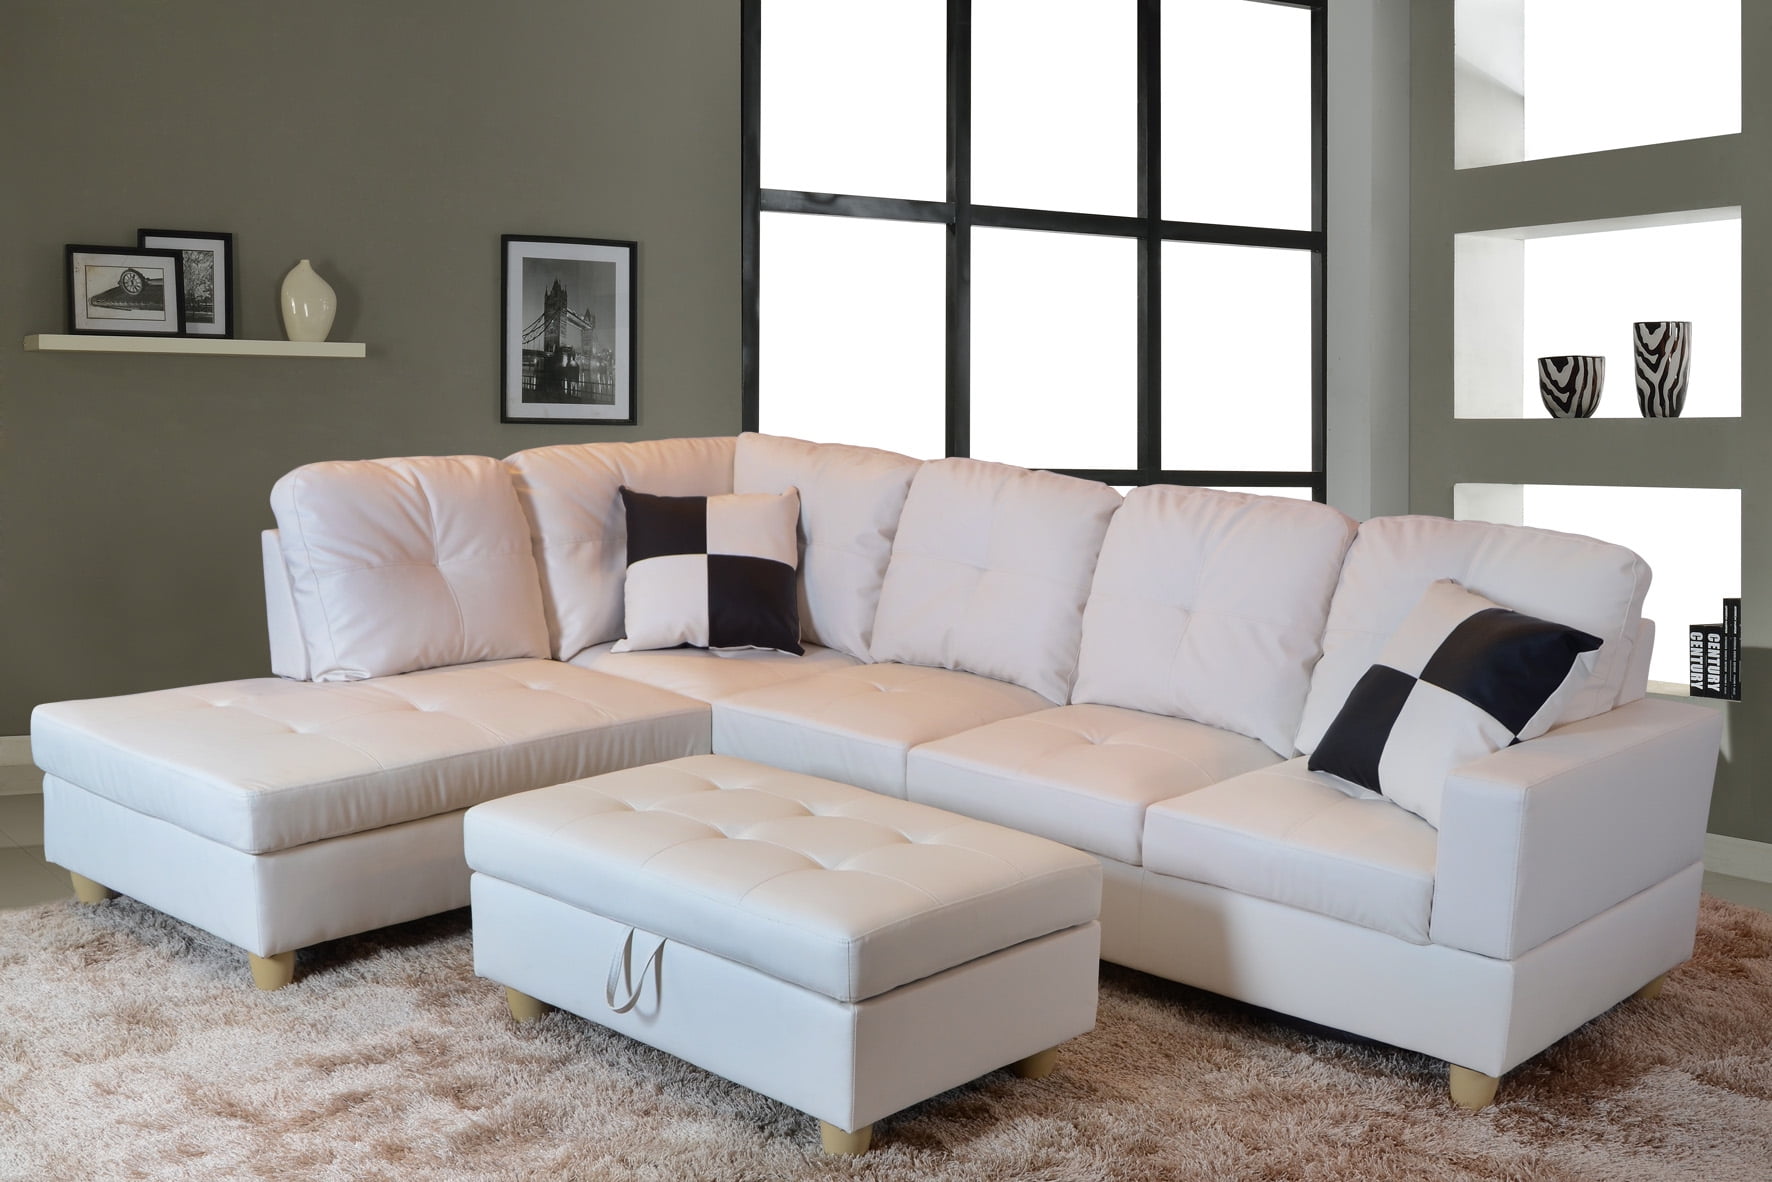 white leather sectional sofa on sale